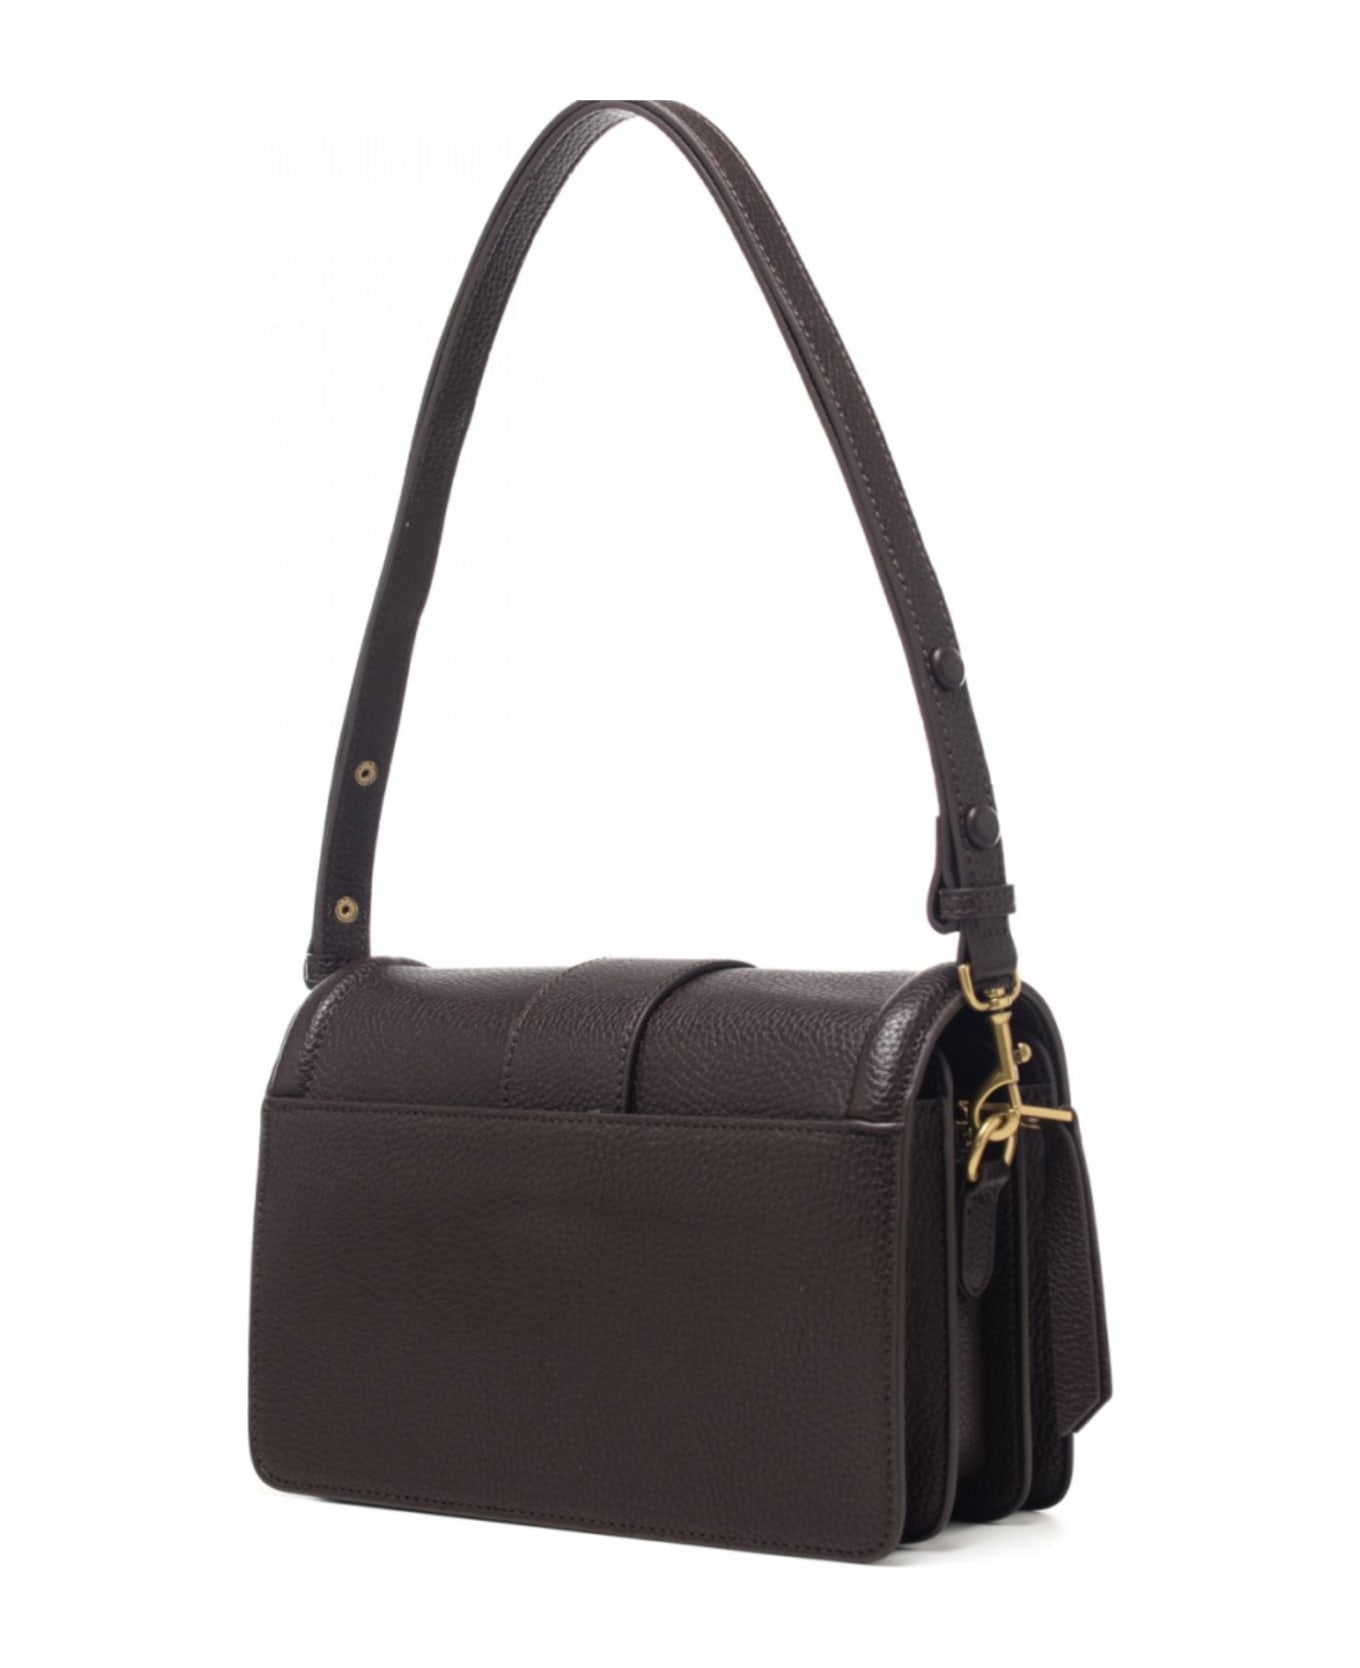 Versace Jeans Couture Bag - COCOA